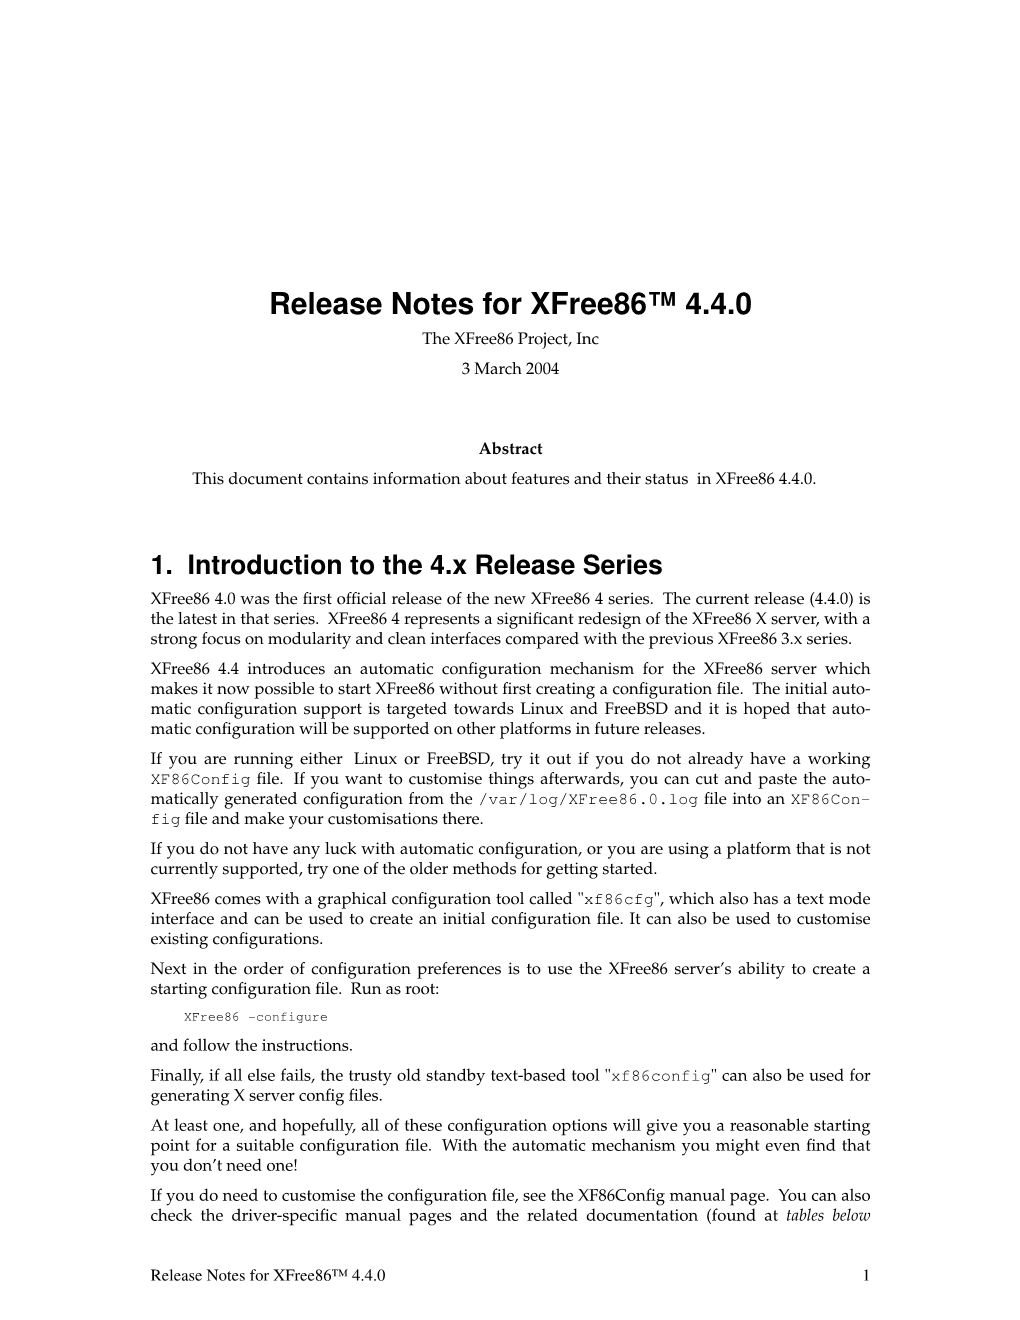 Release Notes for Xfree86™ 4.4.0 the Xfree86 Project, Inc 3March 2004